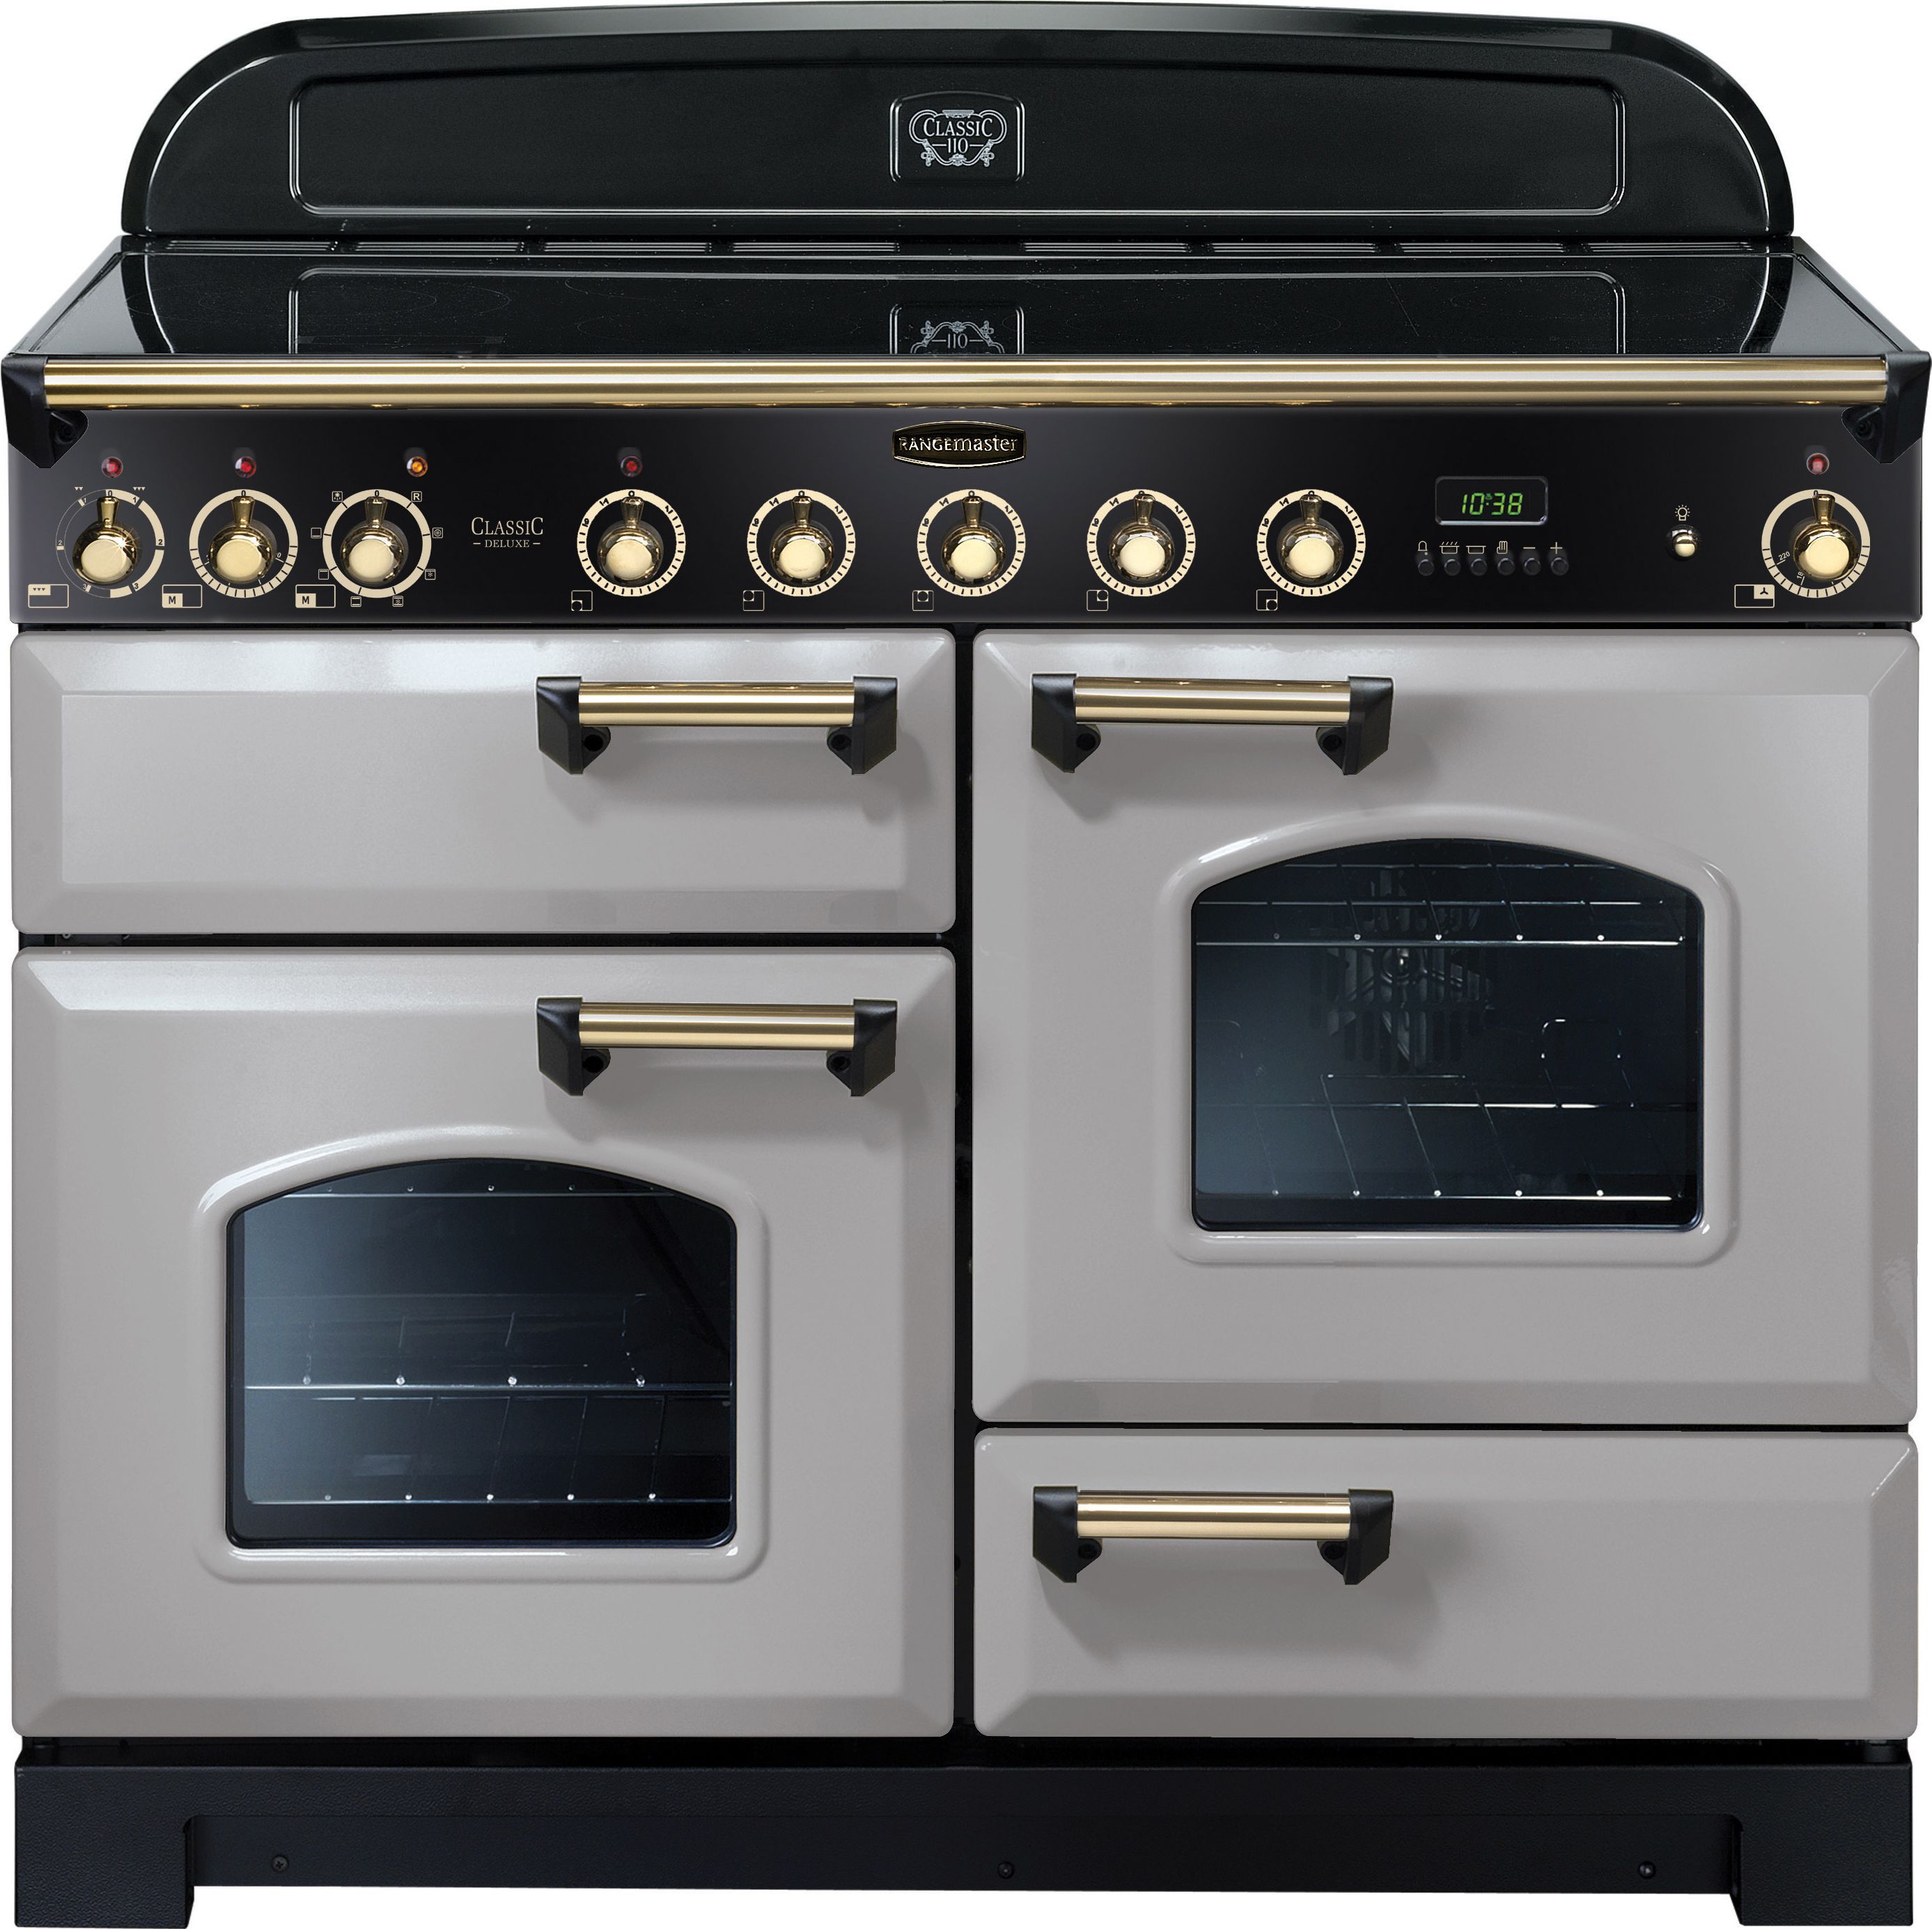 Rangemaster Classic Deluxe CDL110EIRP/B 110cm Electric Range Cooker with Induction Hob - Royal Pearl / Brass - A/A Rated, Grey